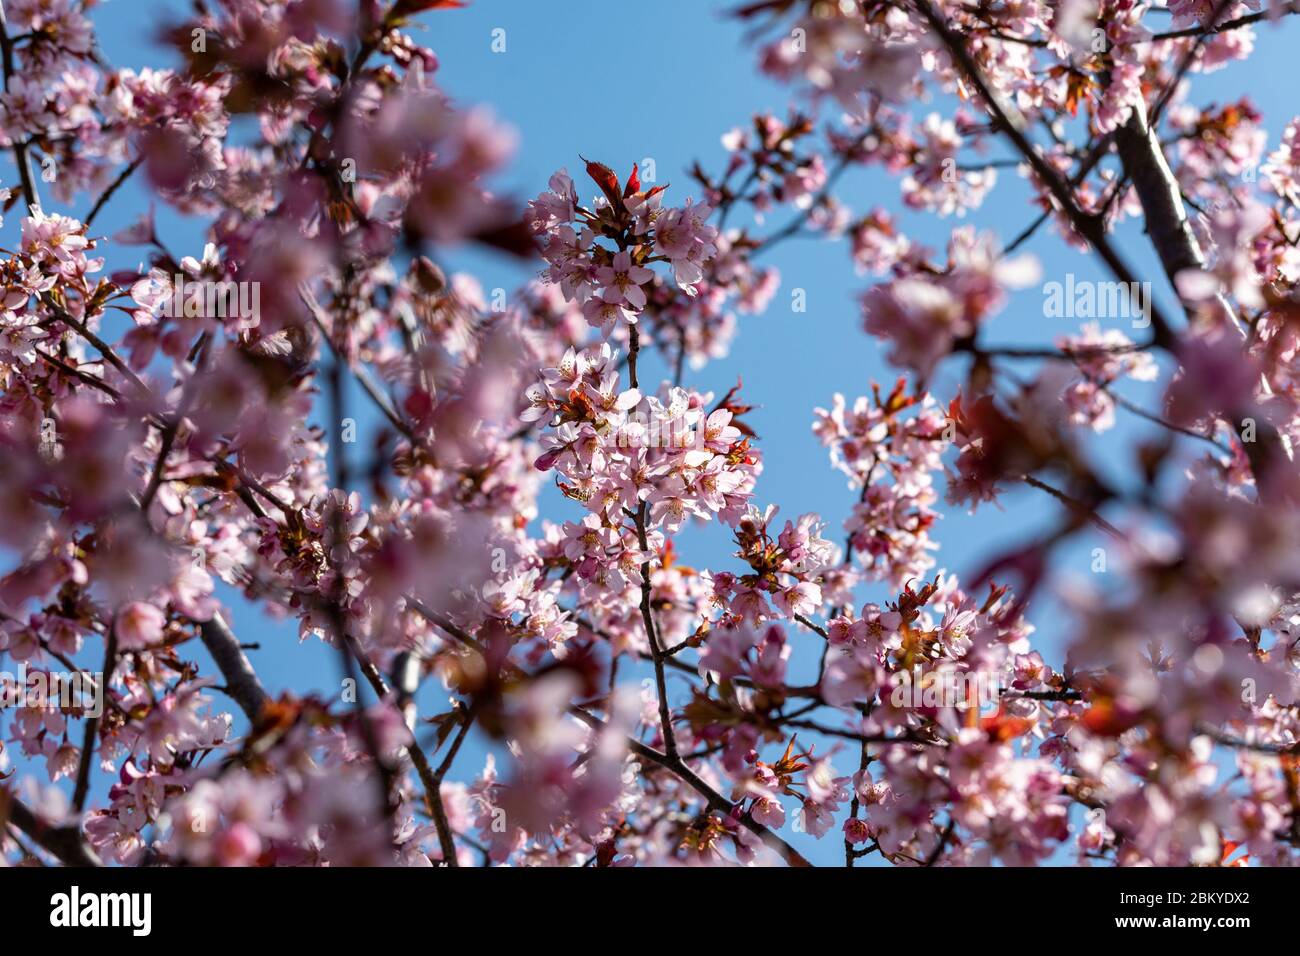 Pink cherry blossoms against clear blue sky. Selective focus. Stock Photo